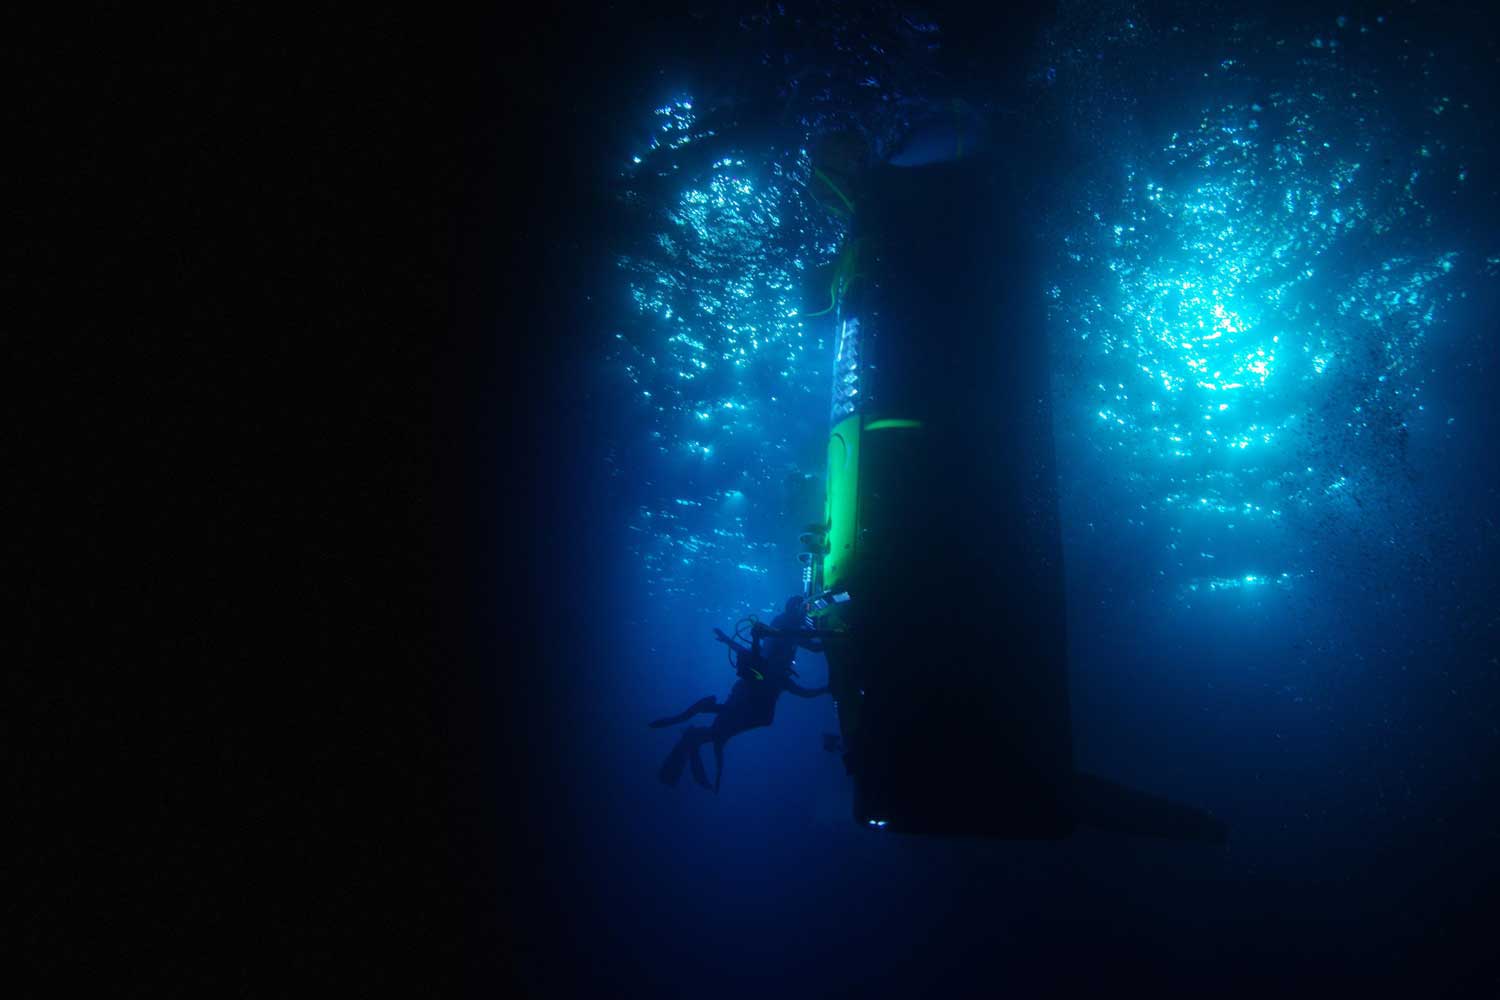 James Cameron’s Deepsea Challenger submersible on a test dive in Papua New Guinea